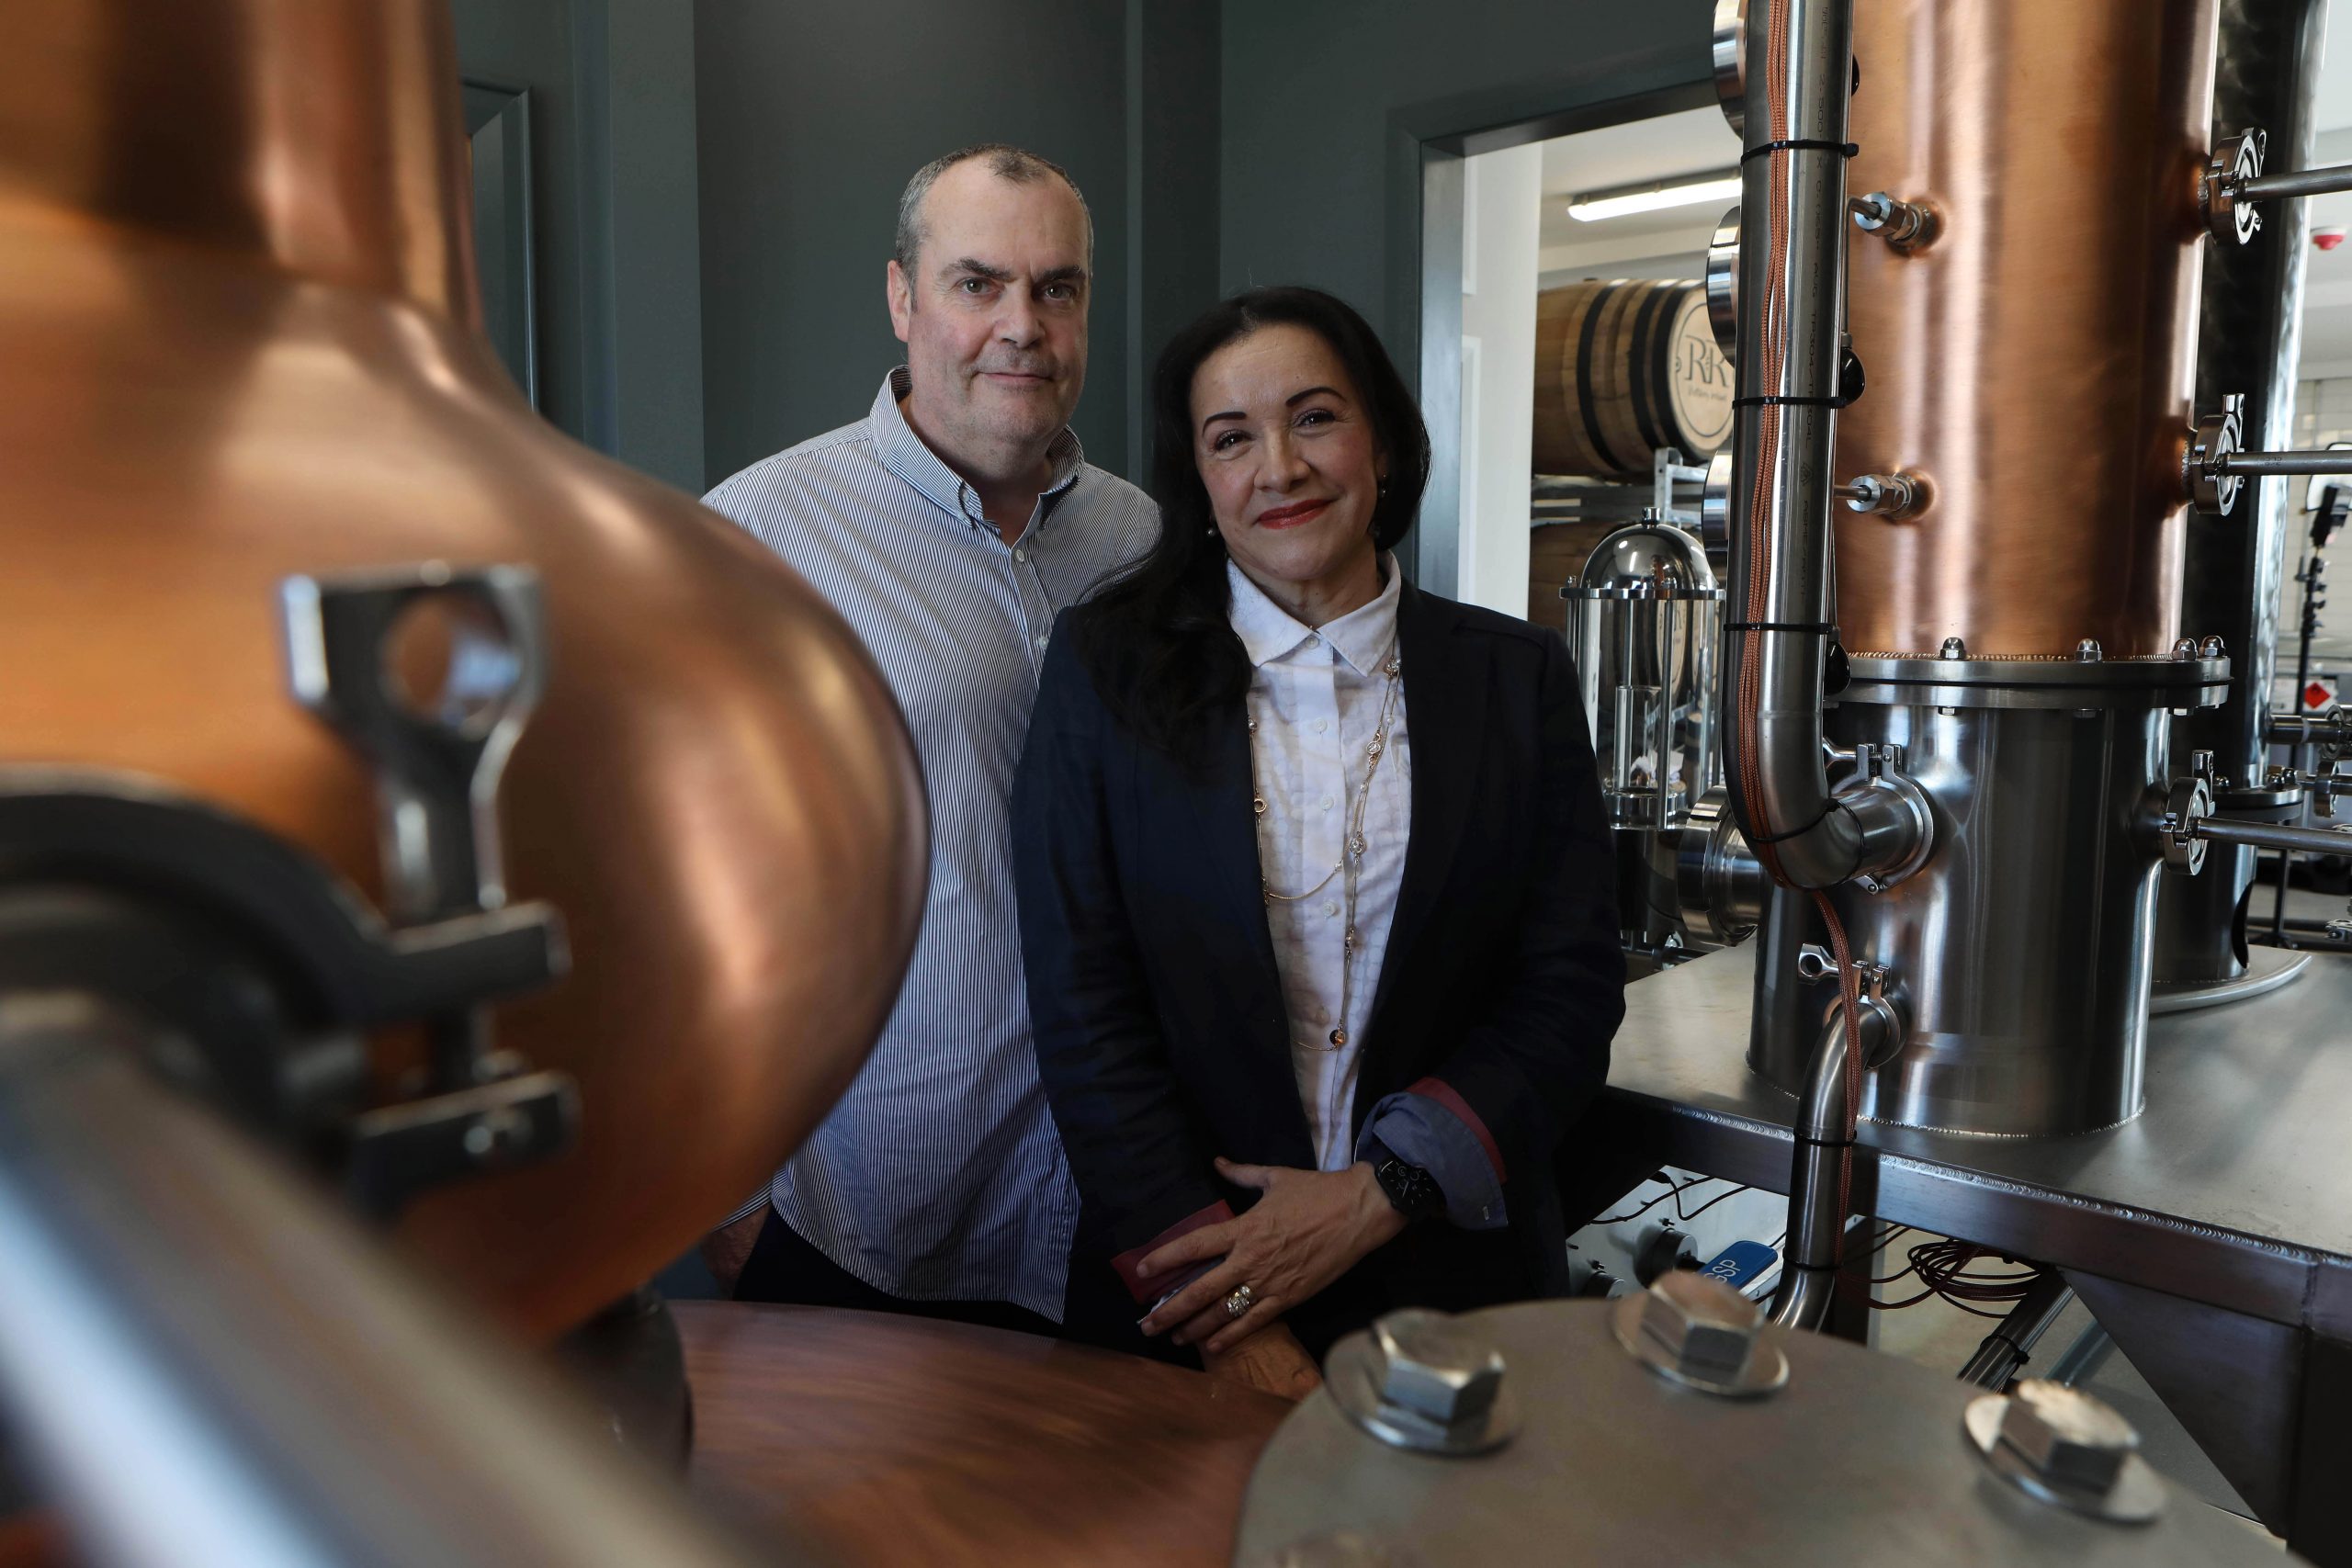 New £1m distillery could create 40 jobs